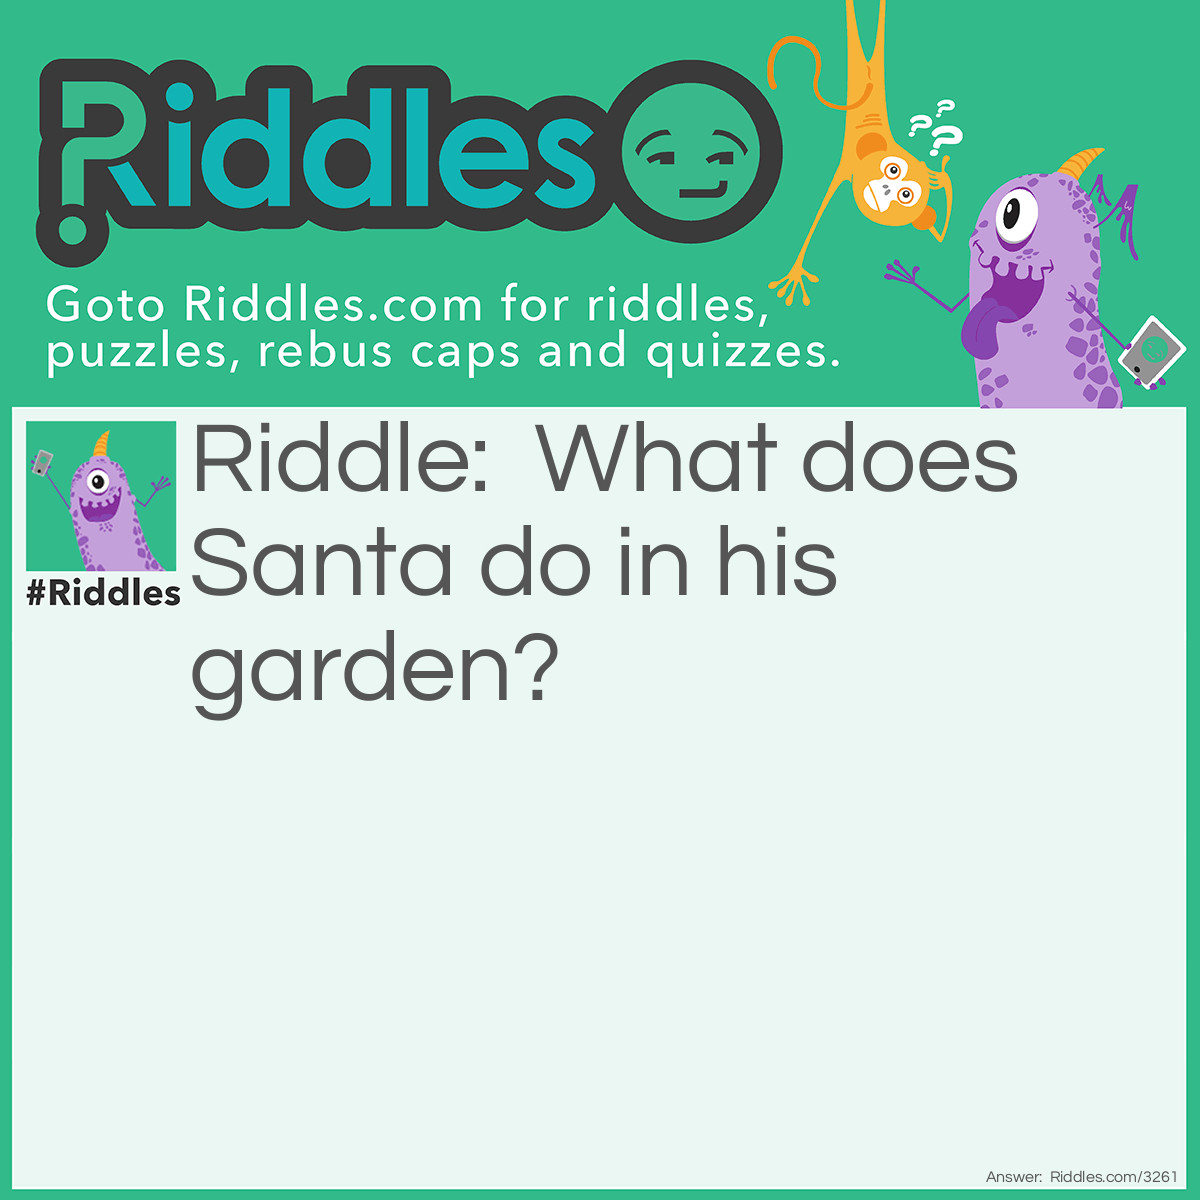 Riddle: What does Santa do in his garden? Answer: Ho Ho Ho!